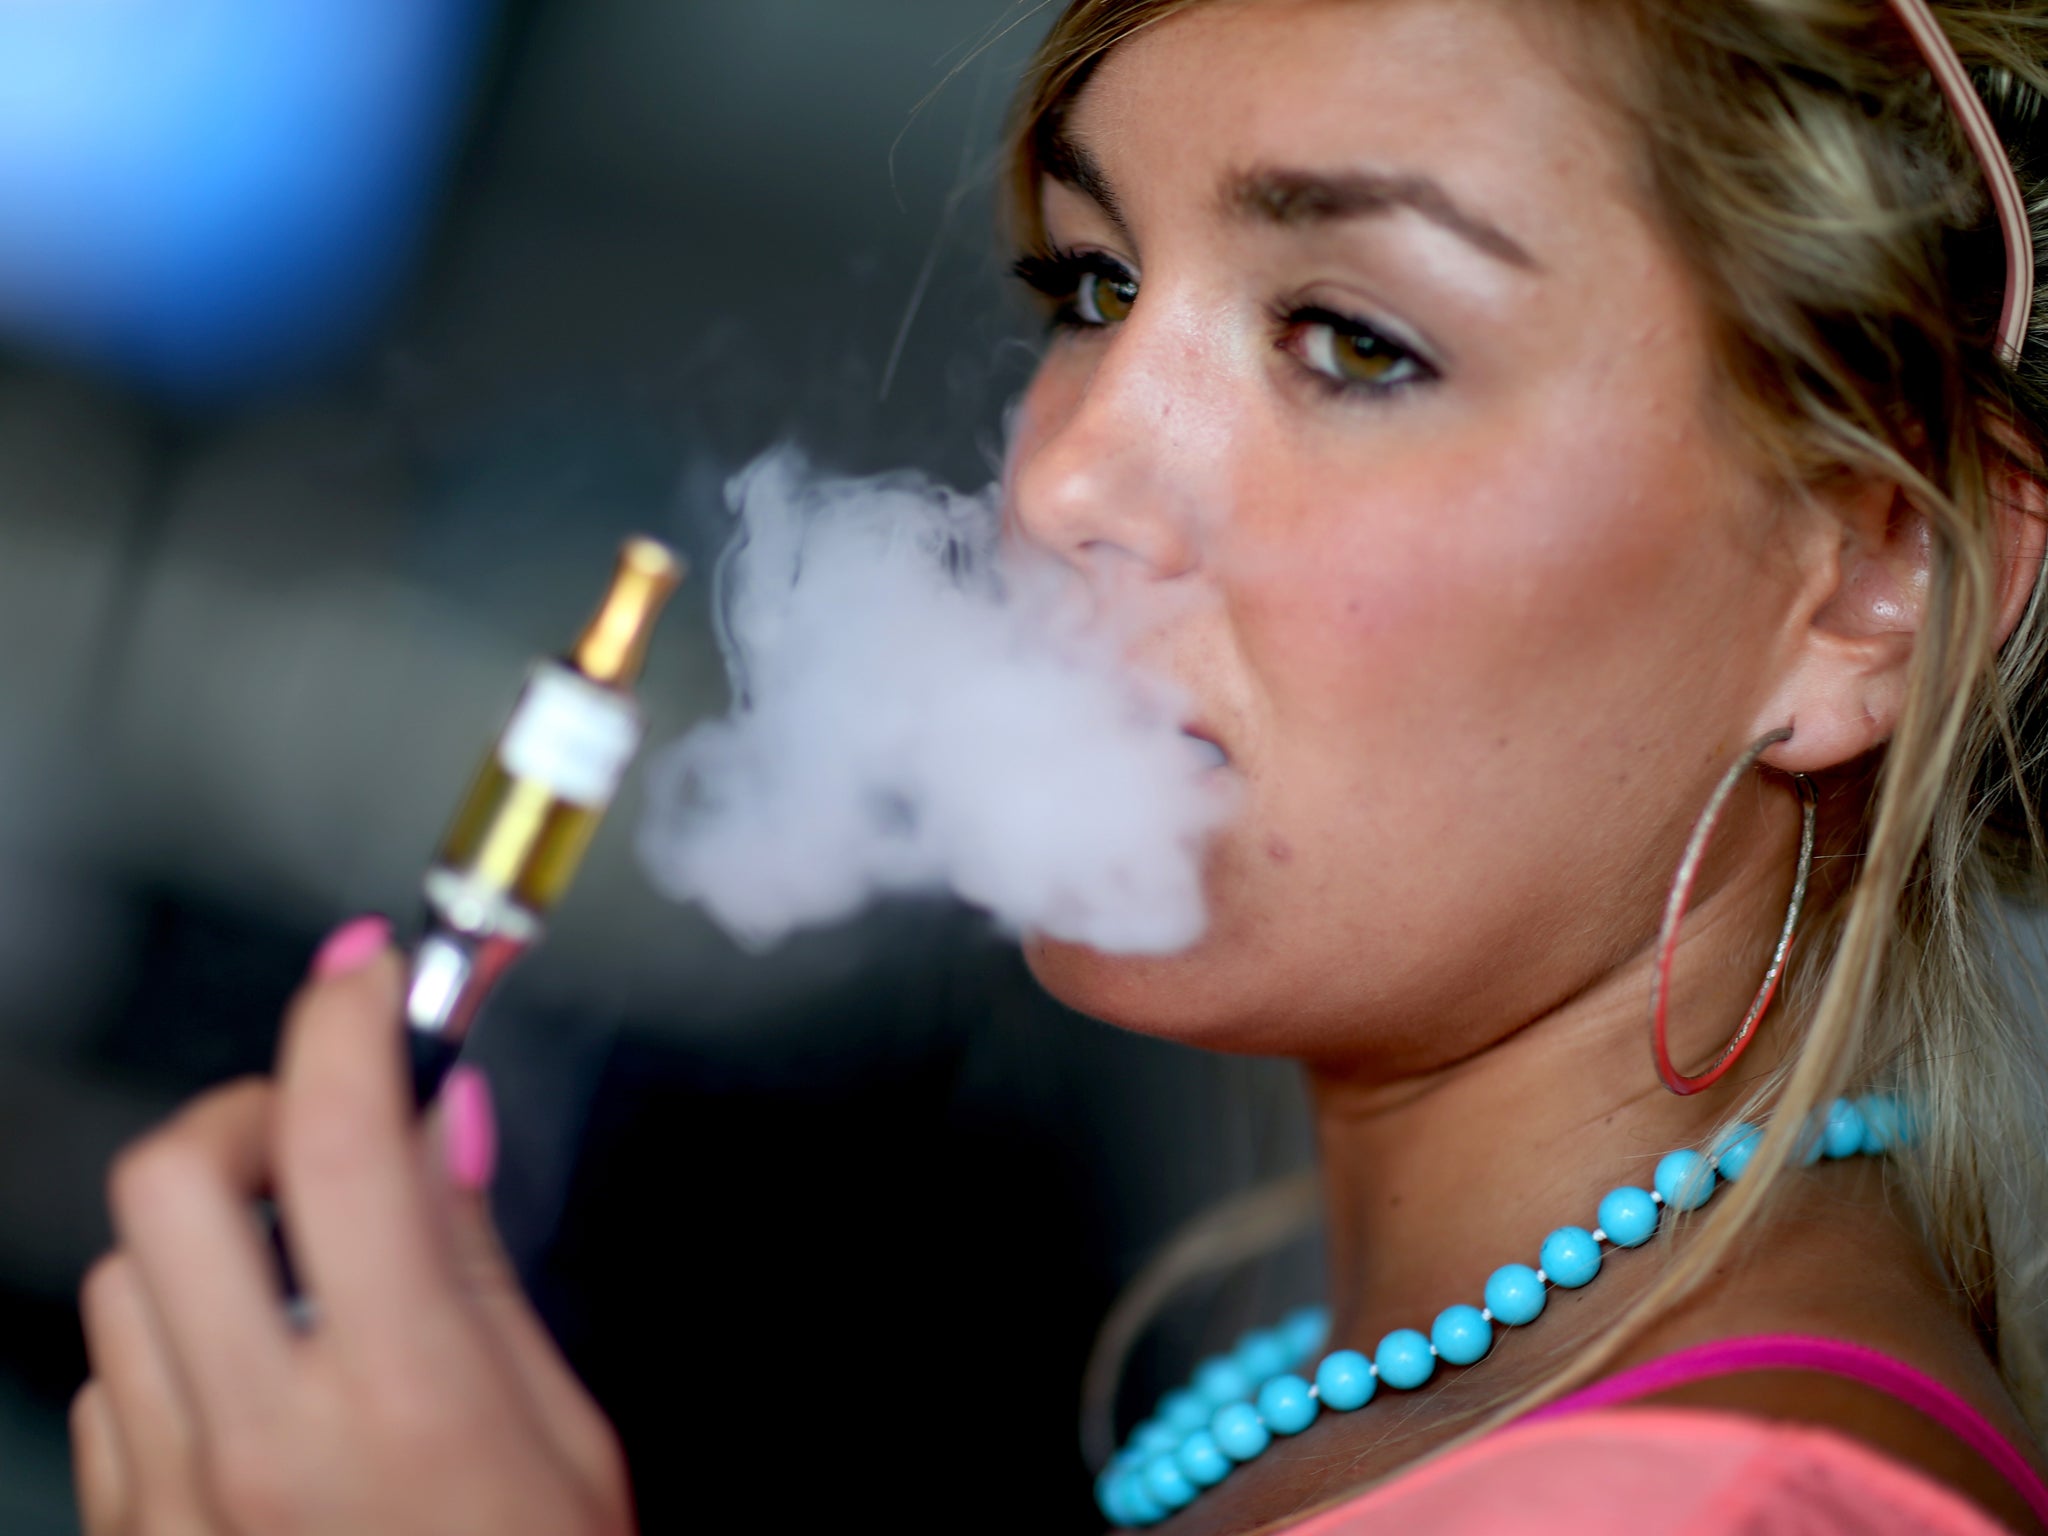 Electronic cigarettes have become hugely popular with teenagers in the UK